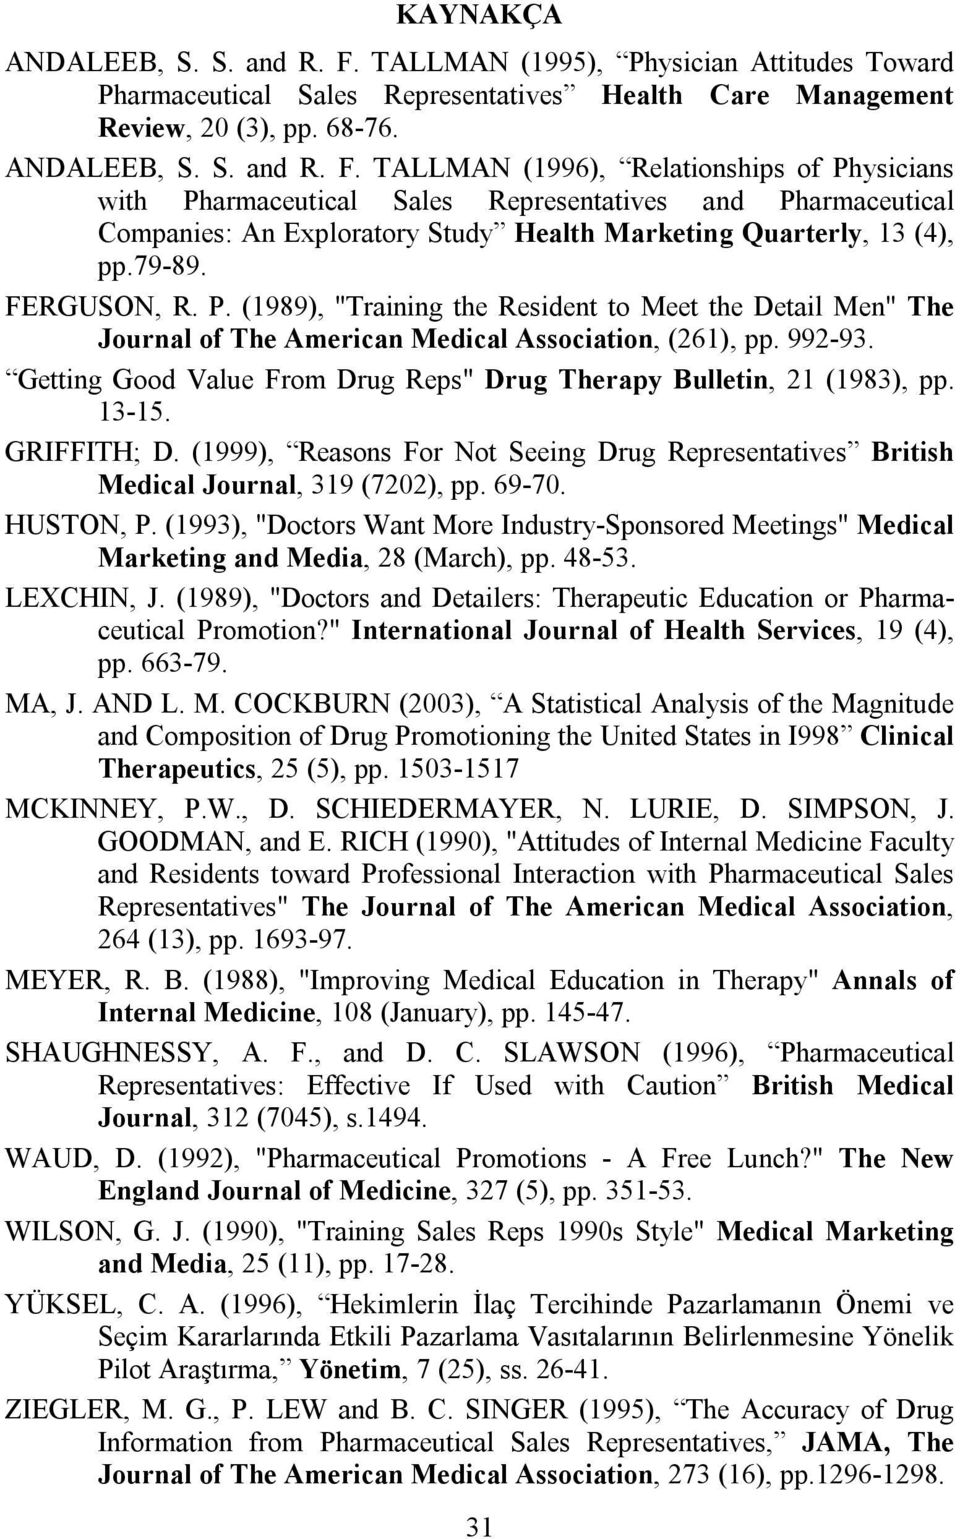 TALLMAN (1996), Relationships of Physicians with Pharmaceutical Sales Representatives and Pharmaceutical Companies: An Exploratory Study Health Marketing Quarterly, 13 (4), pp.79-89. FERGUSON, R. P. (1989), "Training the Resident to Meet the Detail Men" The Journal of The American Medical Association, (261), pp.